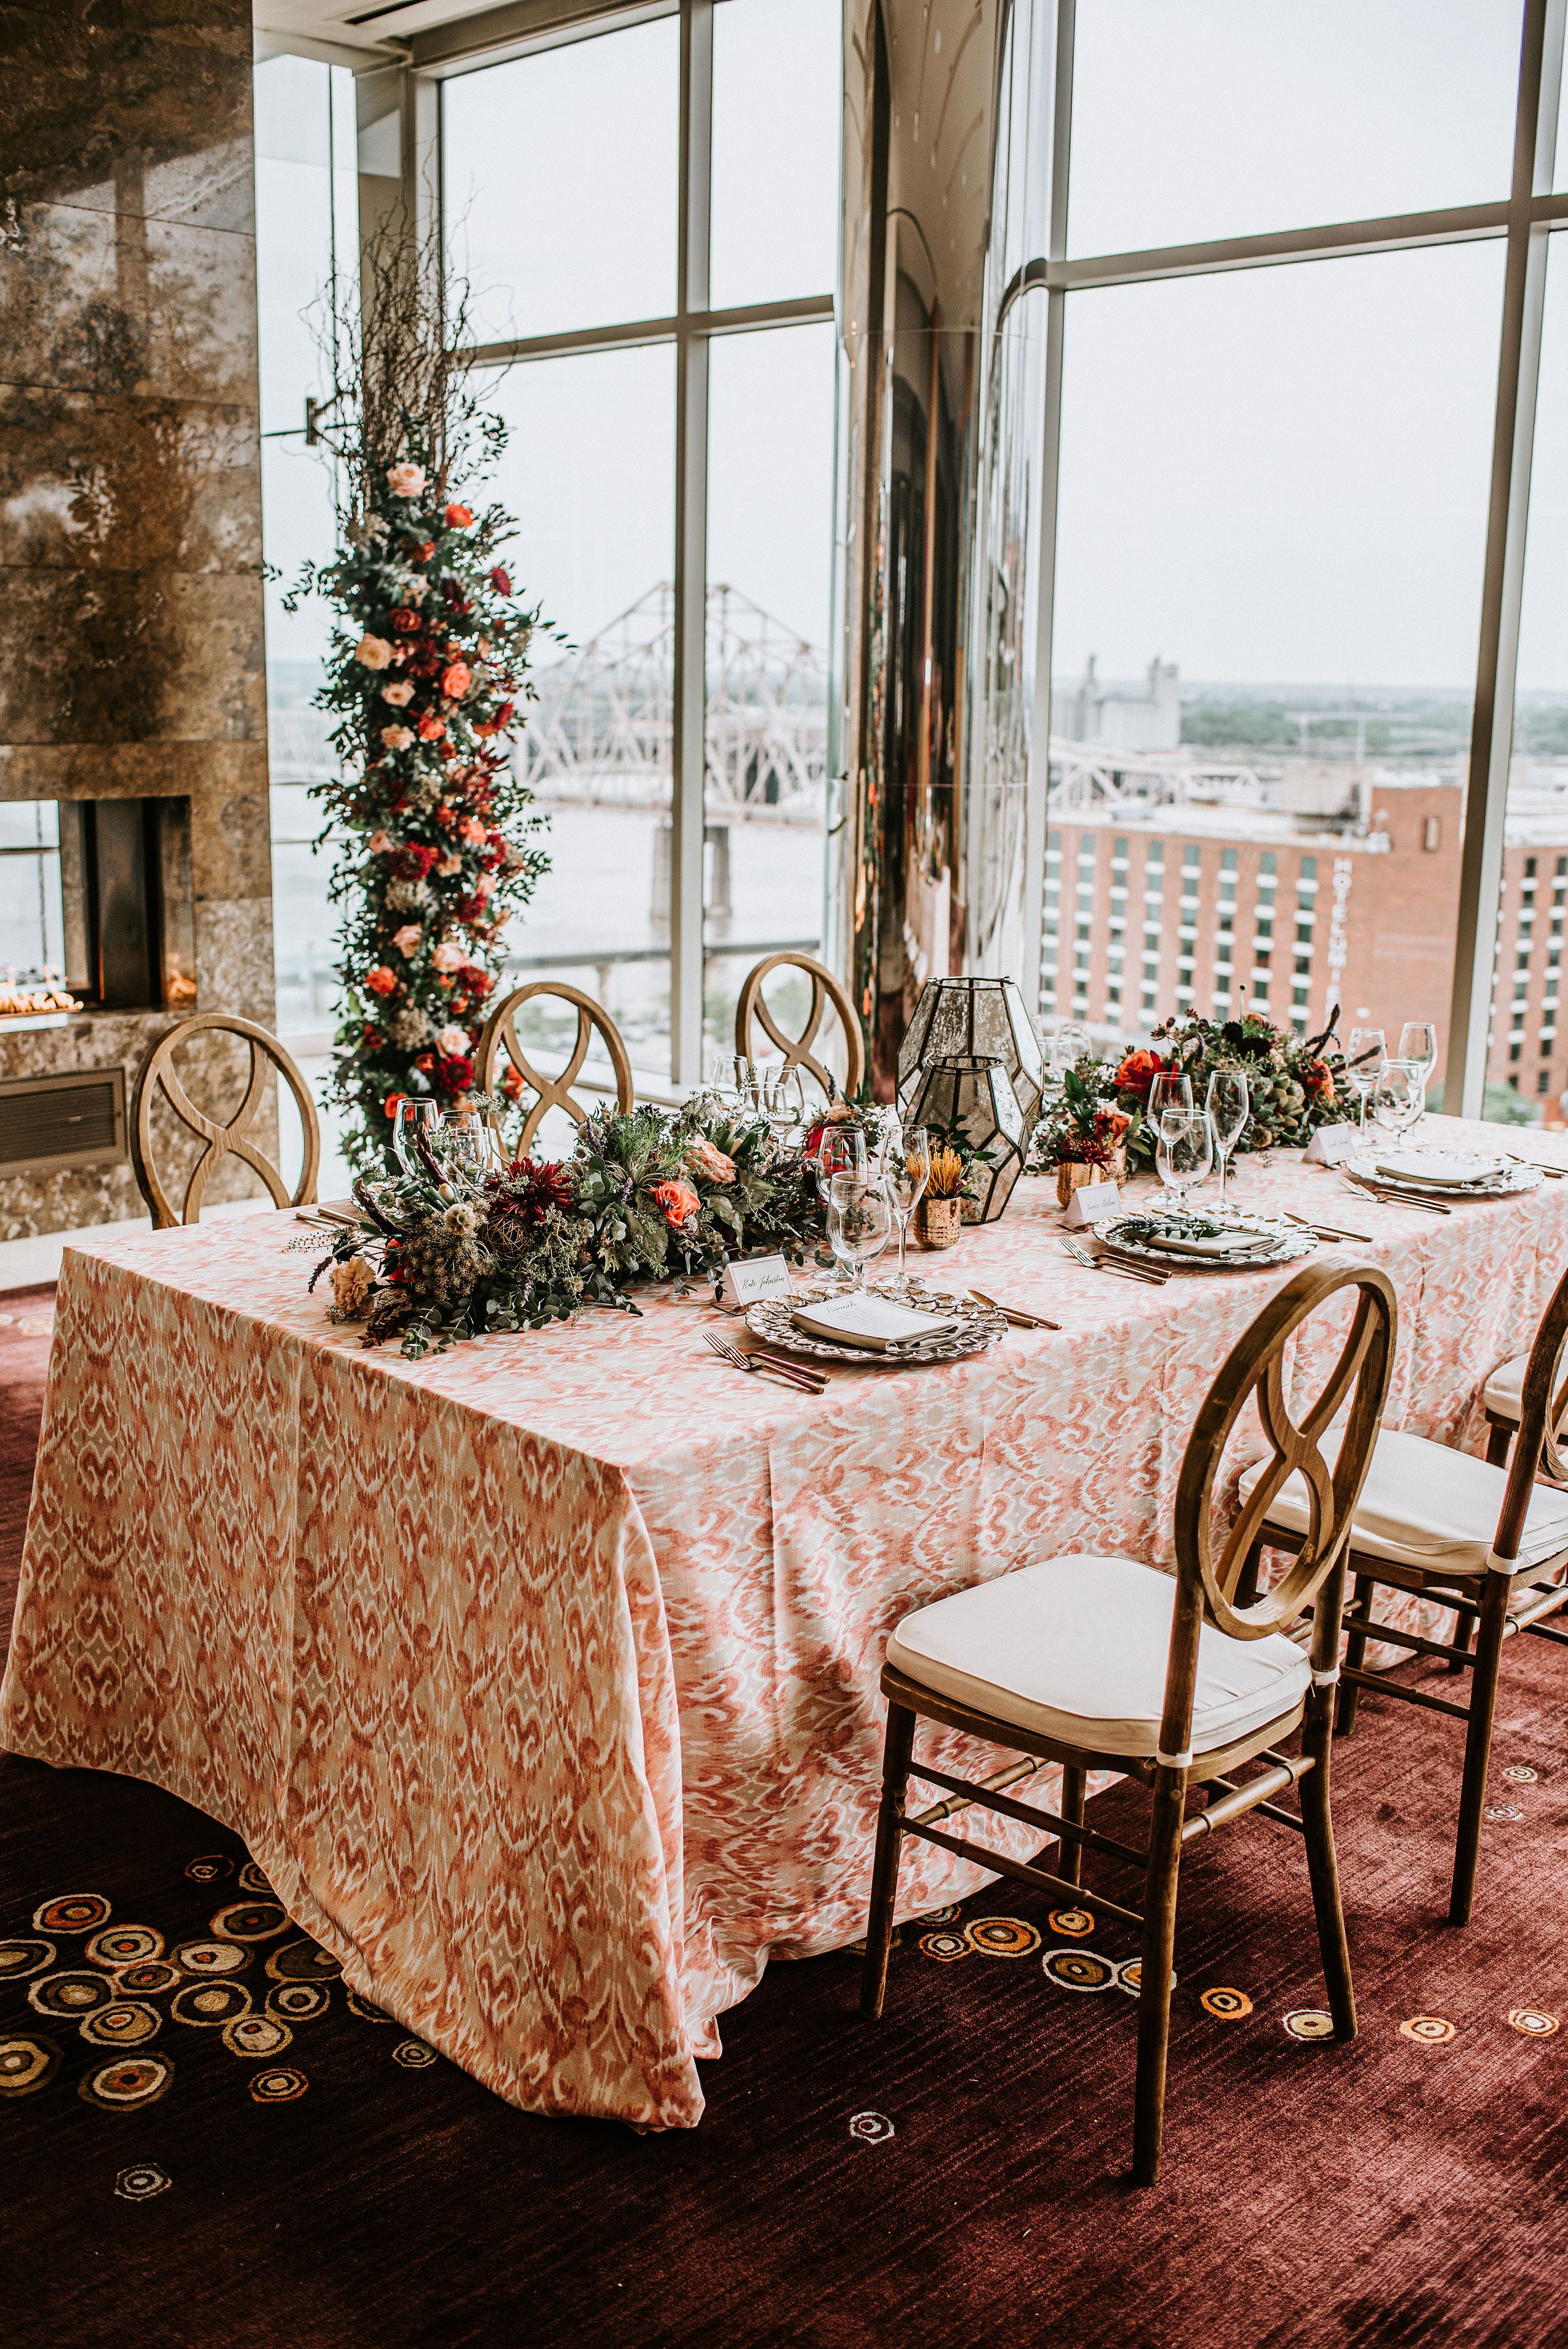 Four Seasons Hotel St. Louis | Rehearsal Dinners, Bridal Showers & Parties - St. Louis, MO